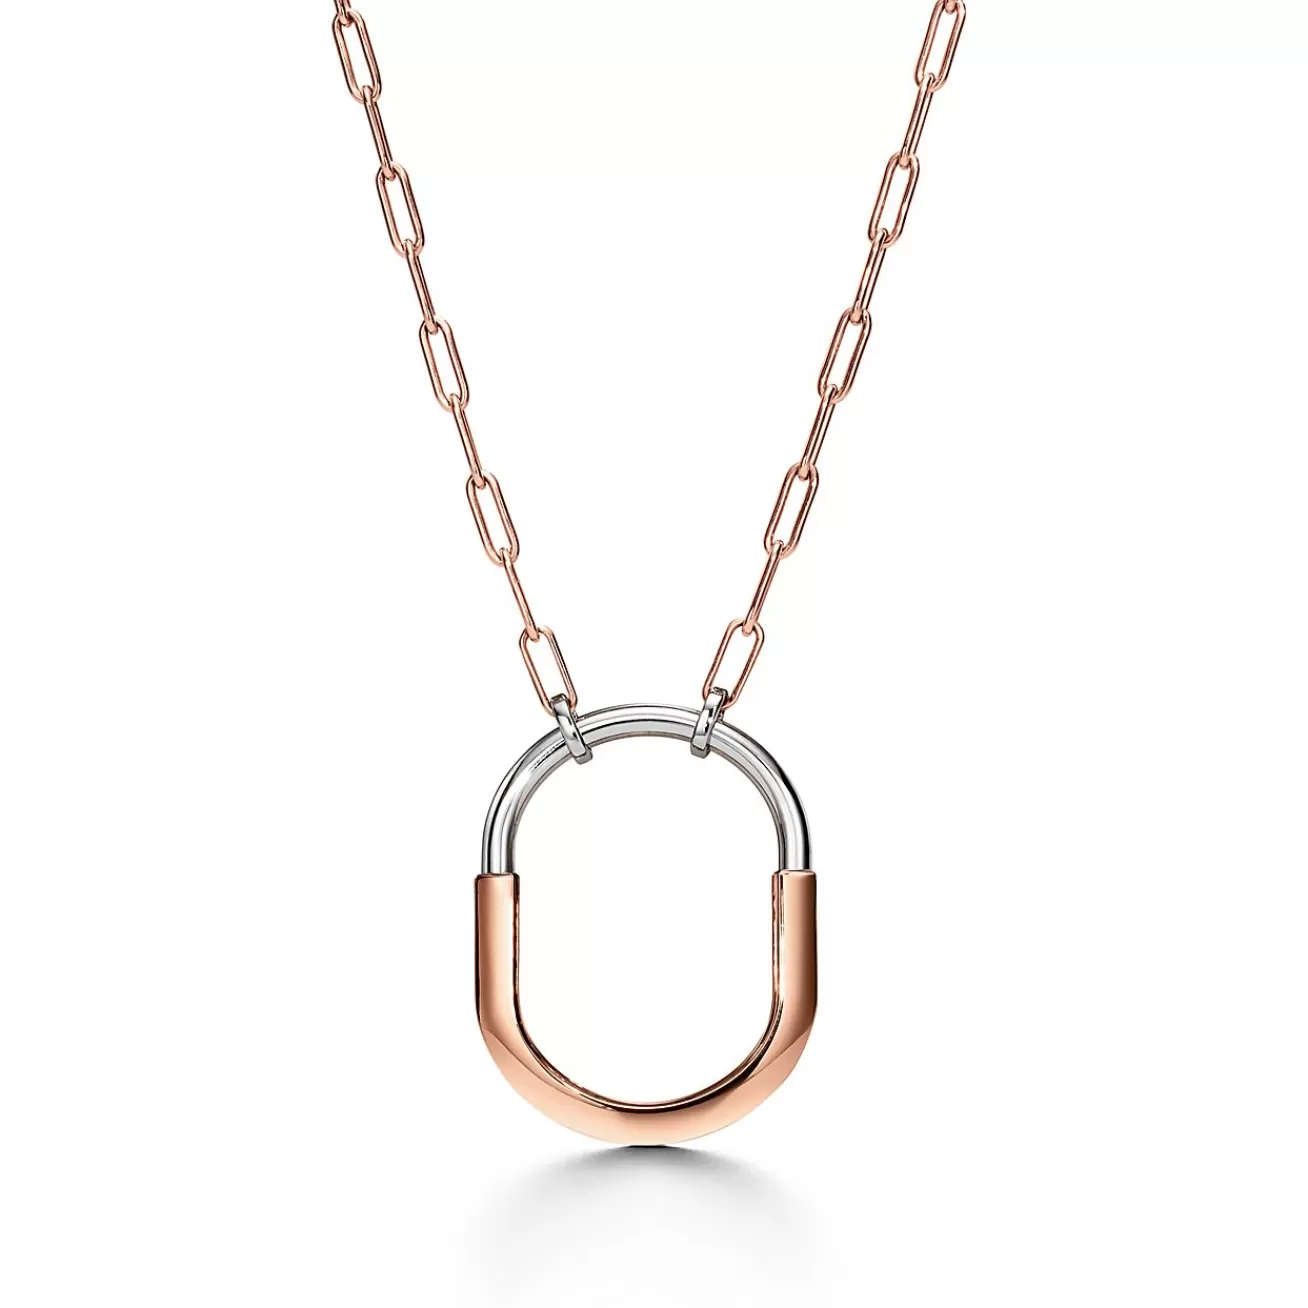 Tiffany & Co. Tiffany Lock Pendant in Rose and White Gold with Diamonds, Extra Large | ^ Necklaces & Pendants | Rose Gold Jewelry